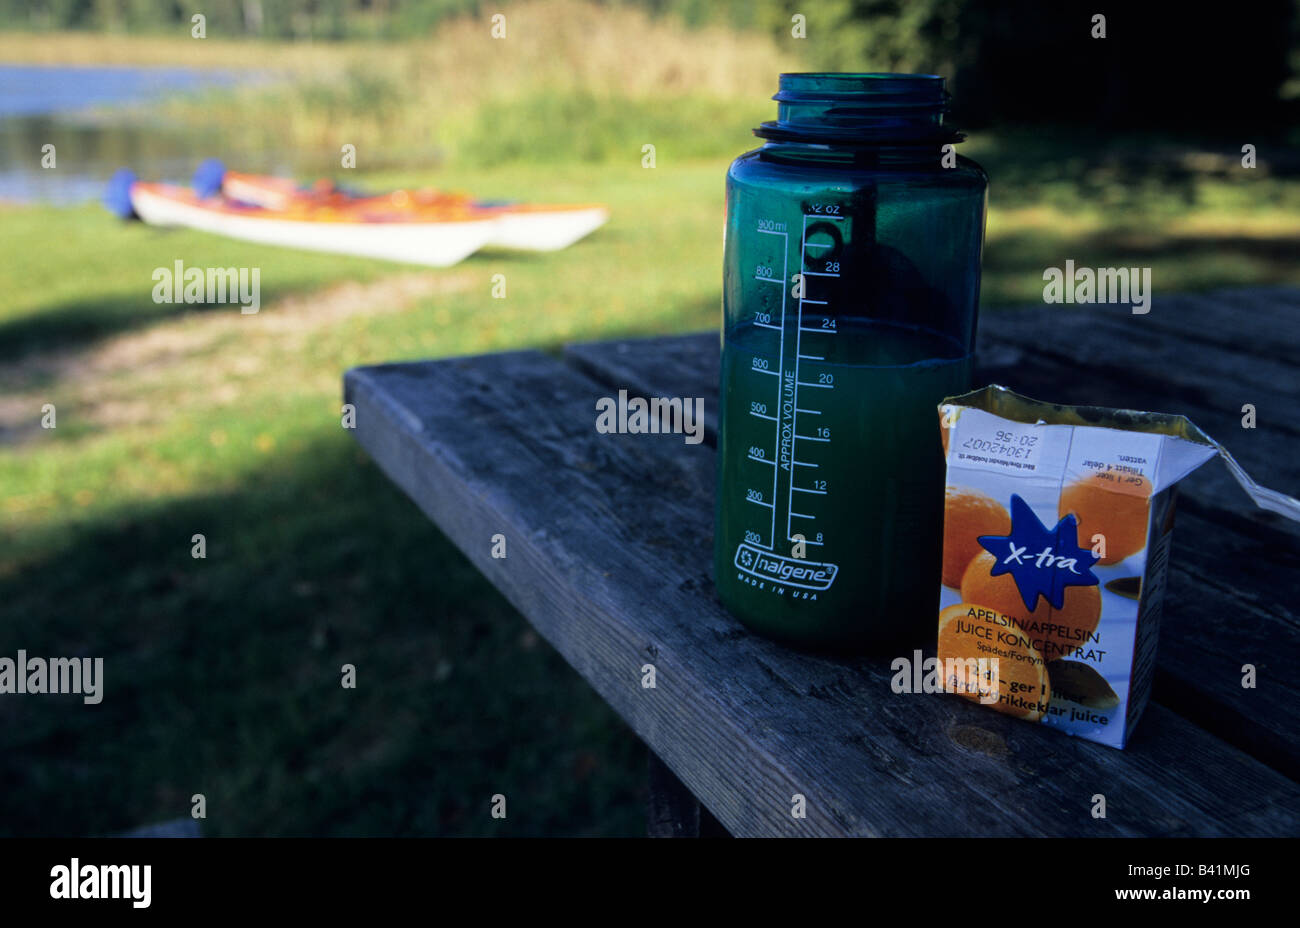 Orange juice concentrate and water bottle on wooden table in front of two kayaks near Flen, Sweden, August 2006 Stock Photo